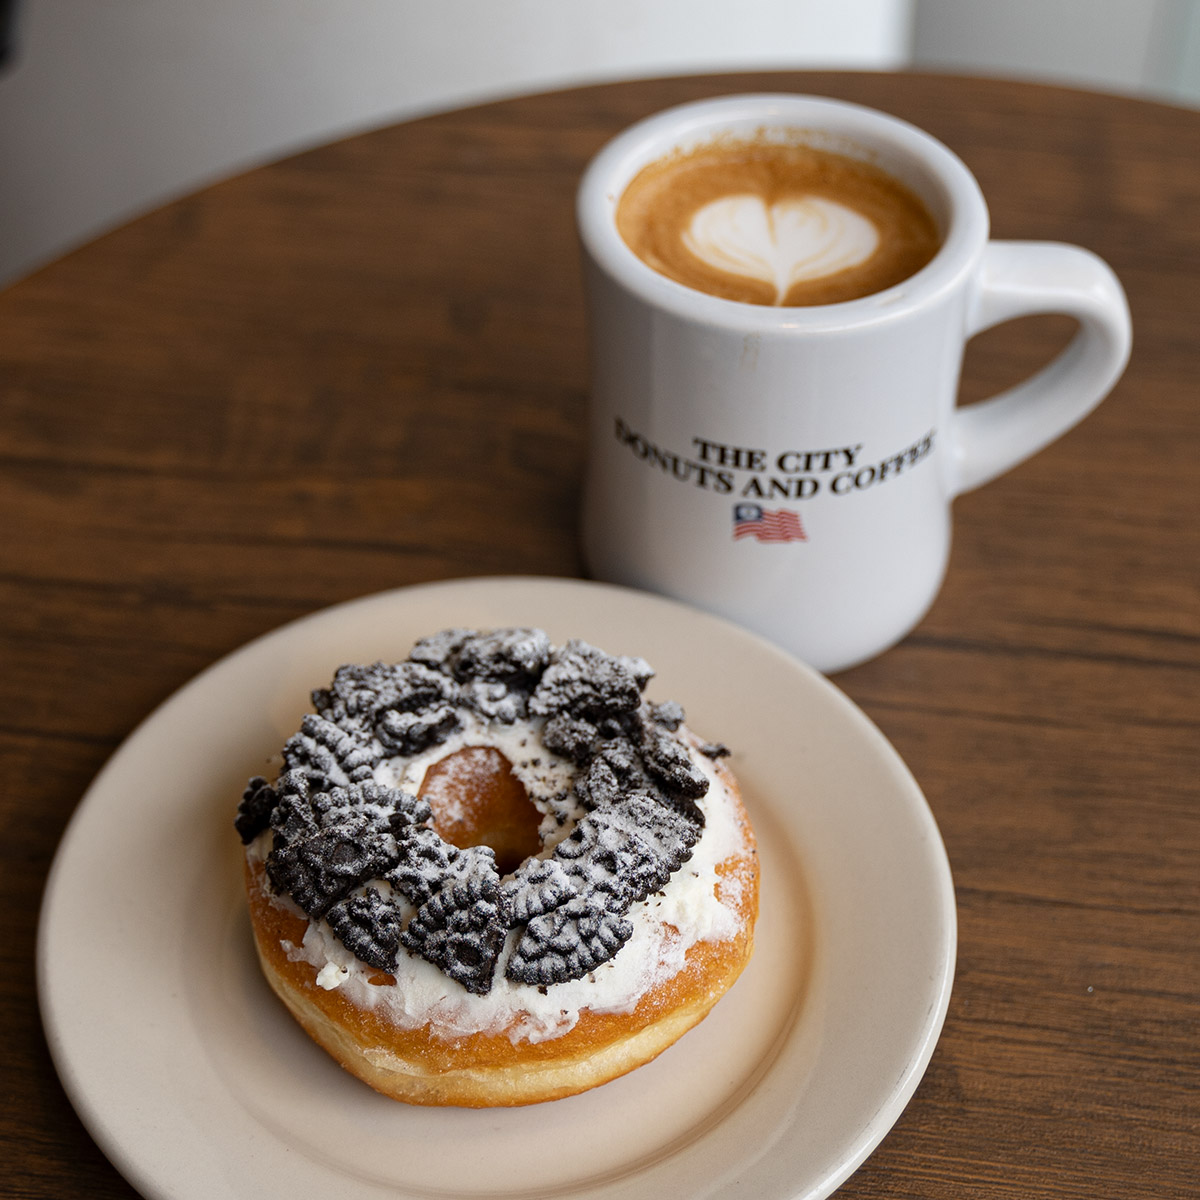 The City Donuts and Coffee